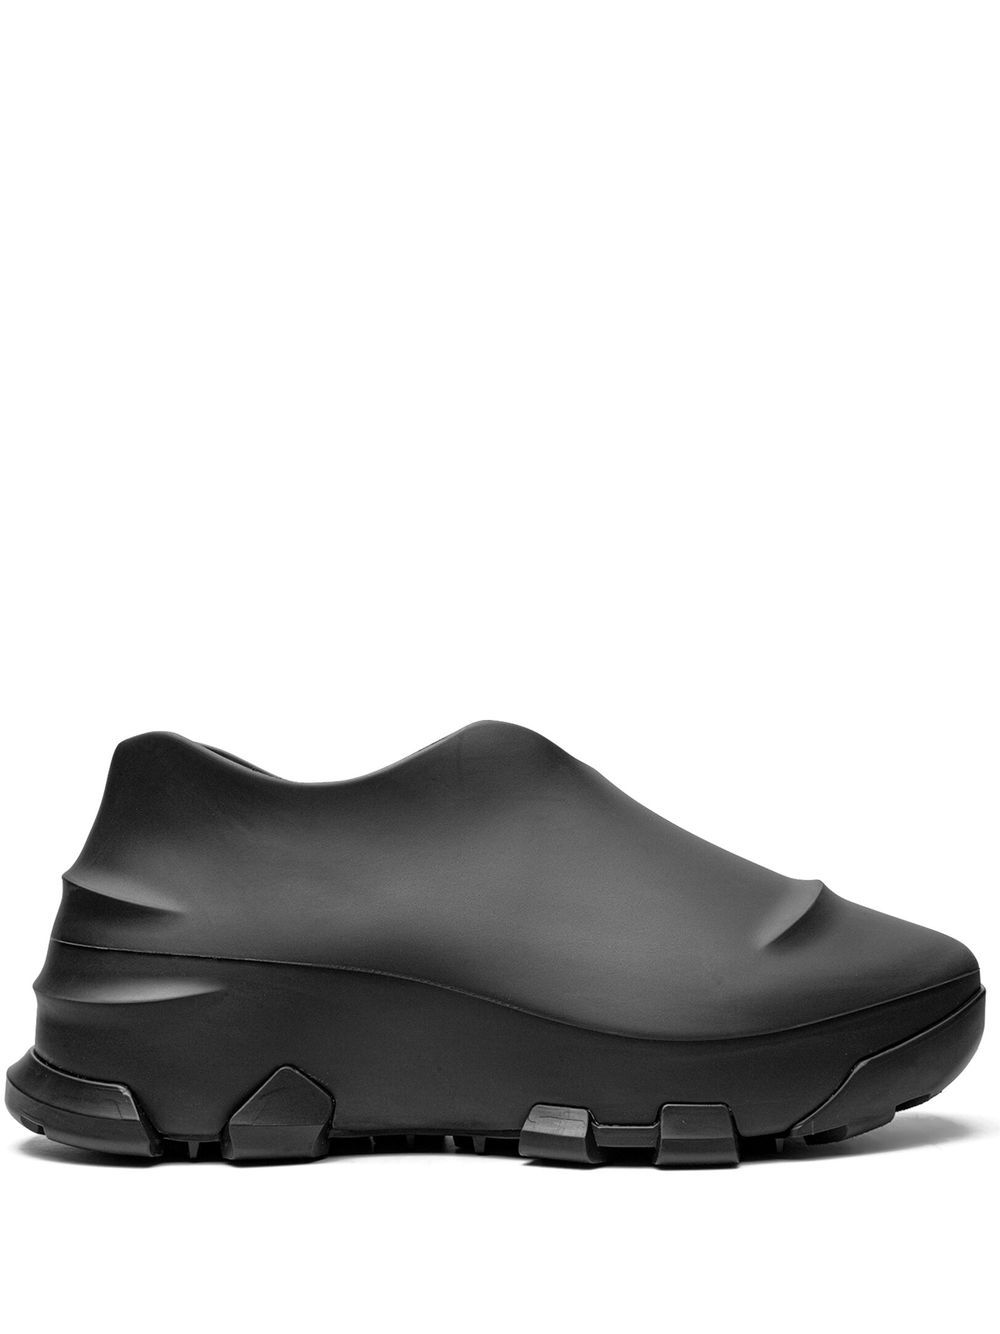 Givenchy Monumental Mallow Low Sneakers - Farfetch